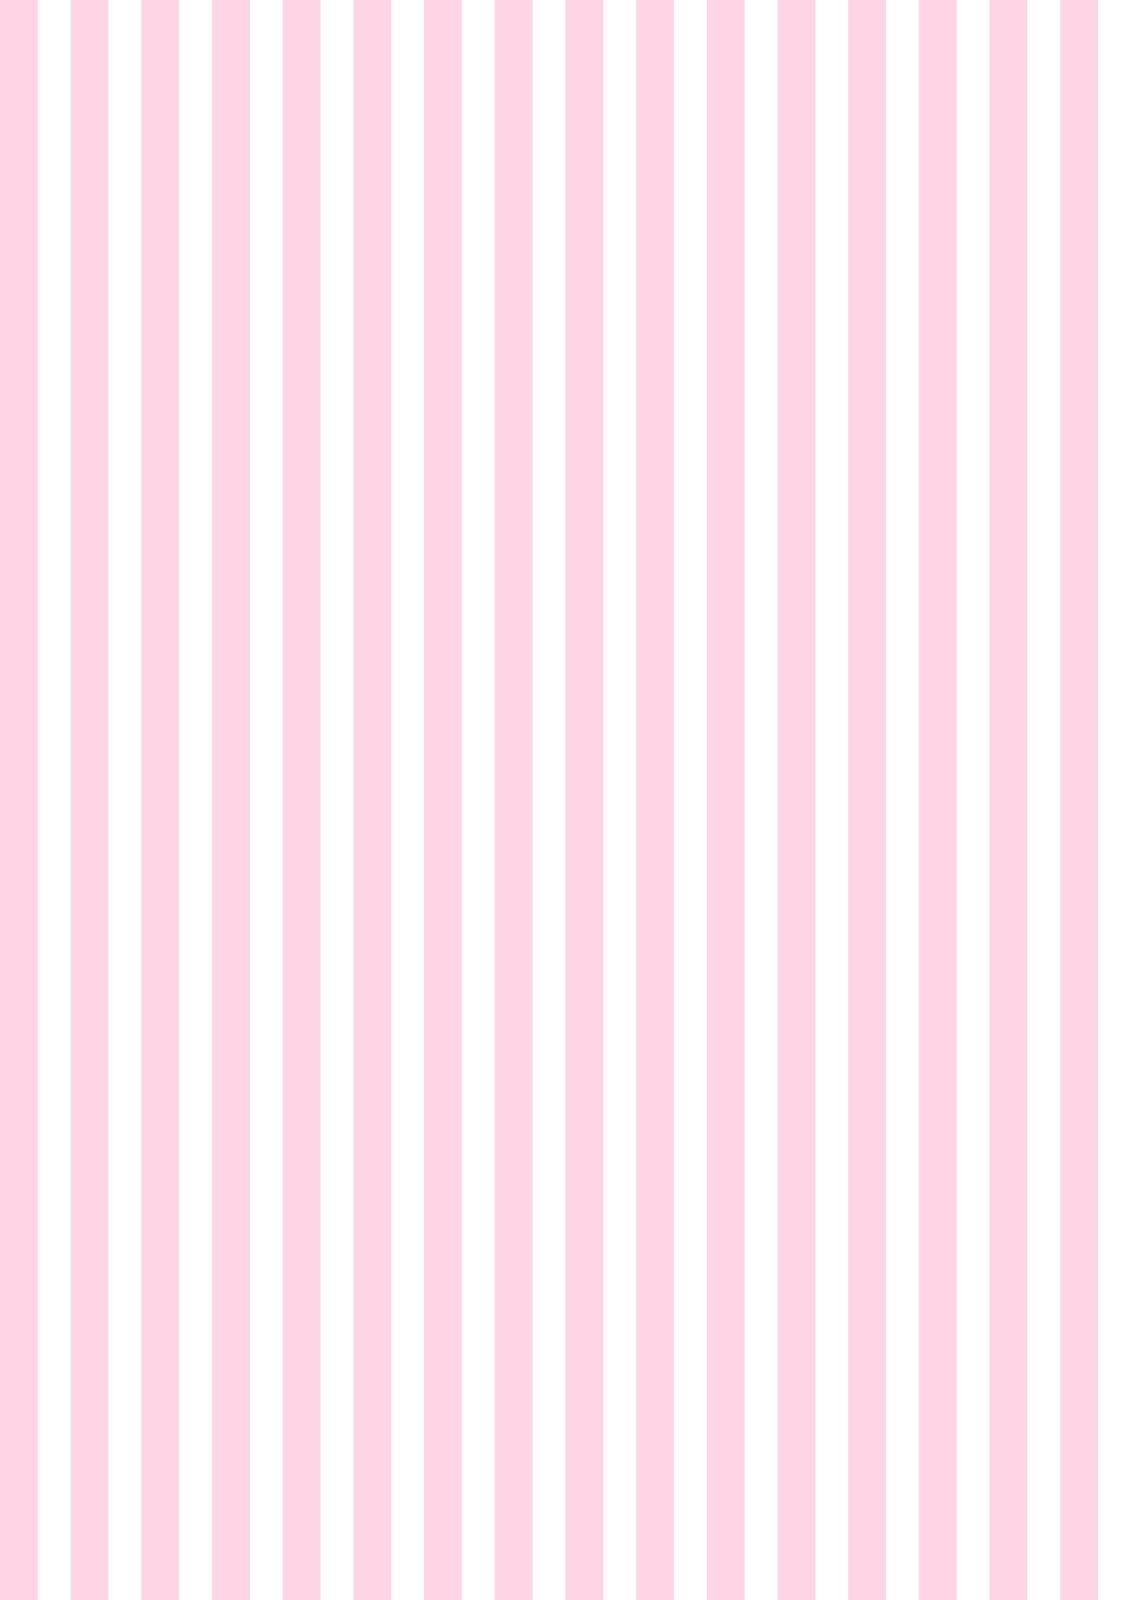 Pink and White Flowers Background